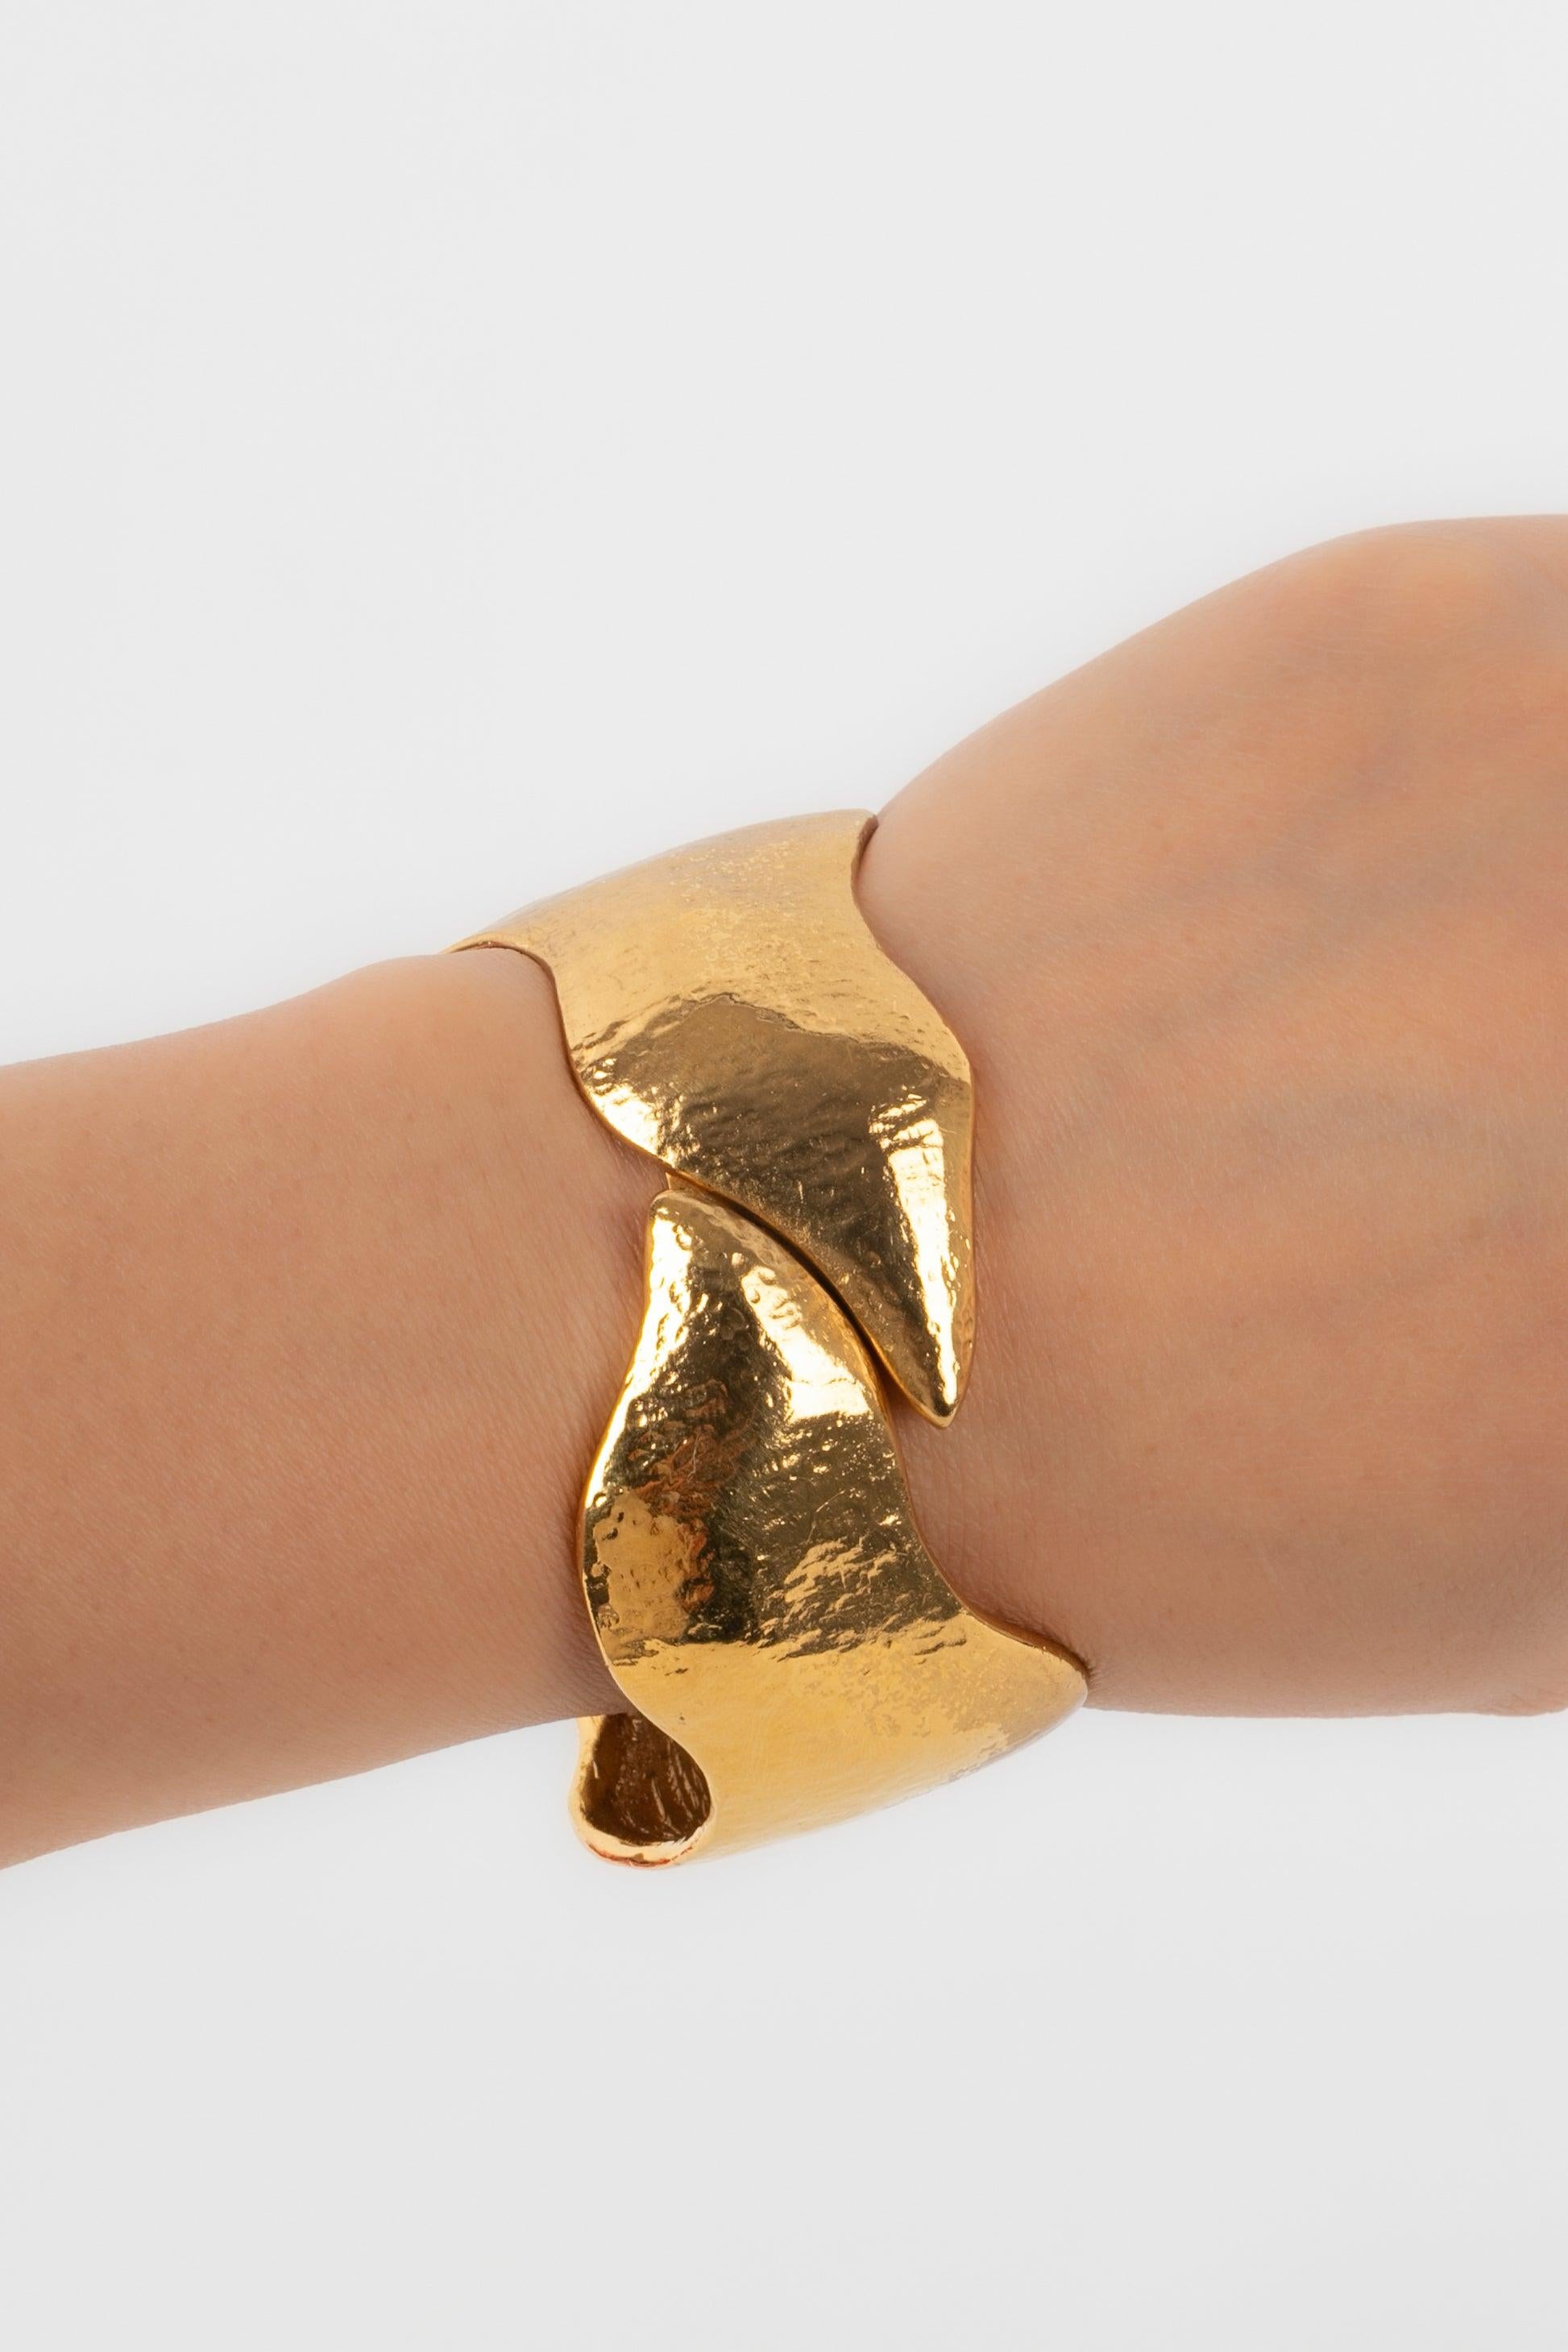 Yves Saint Laurent - (Made in France) Articulated golden metal bracelet.

Additional information:
Condition: Very good condition
Dimensions: Circumference: 17 cm - Opening: 4 cm

Seller Reference: BRA63